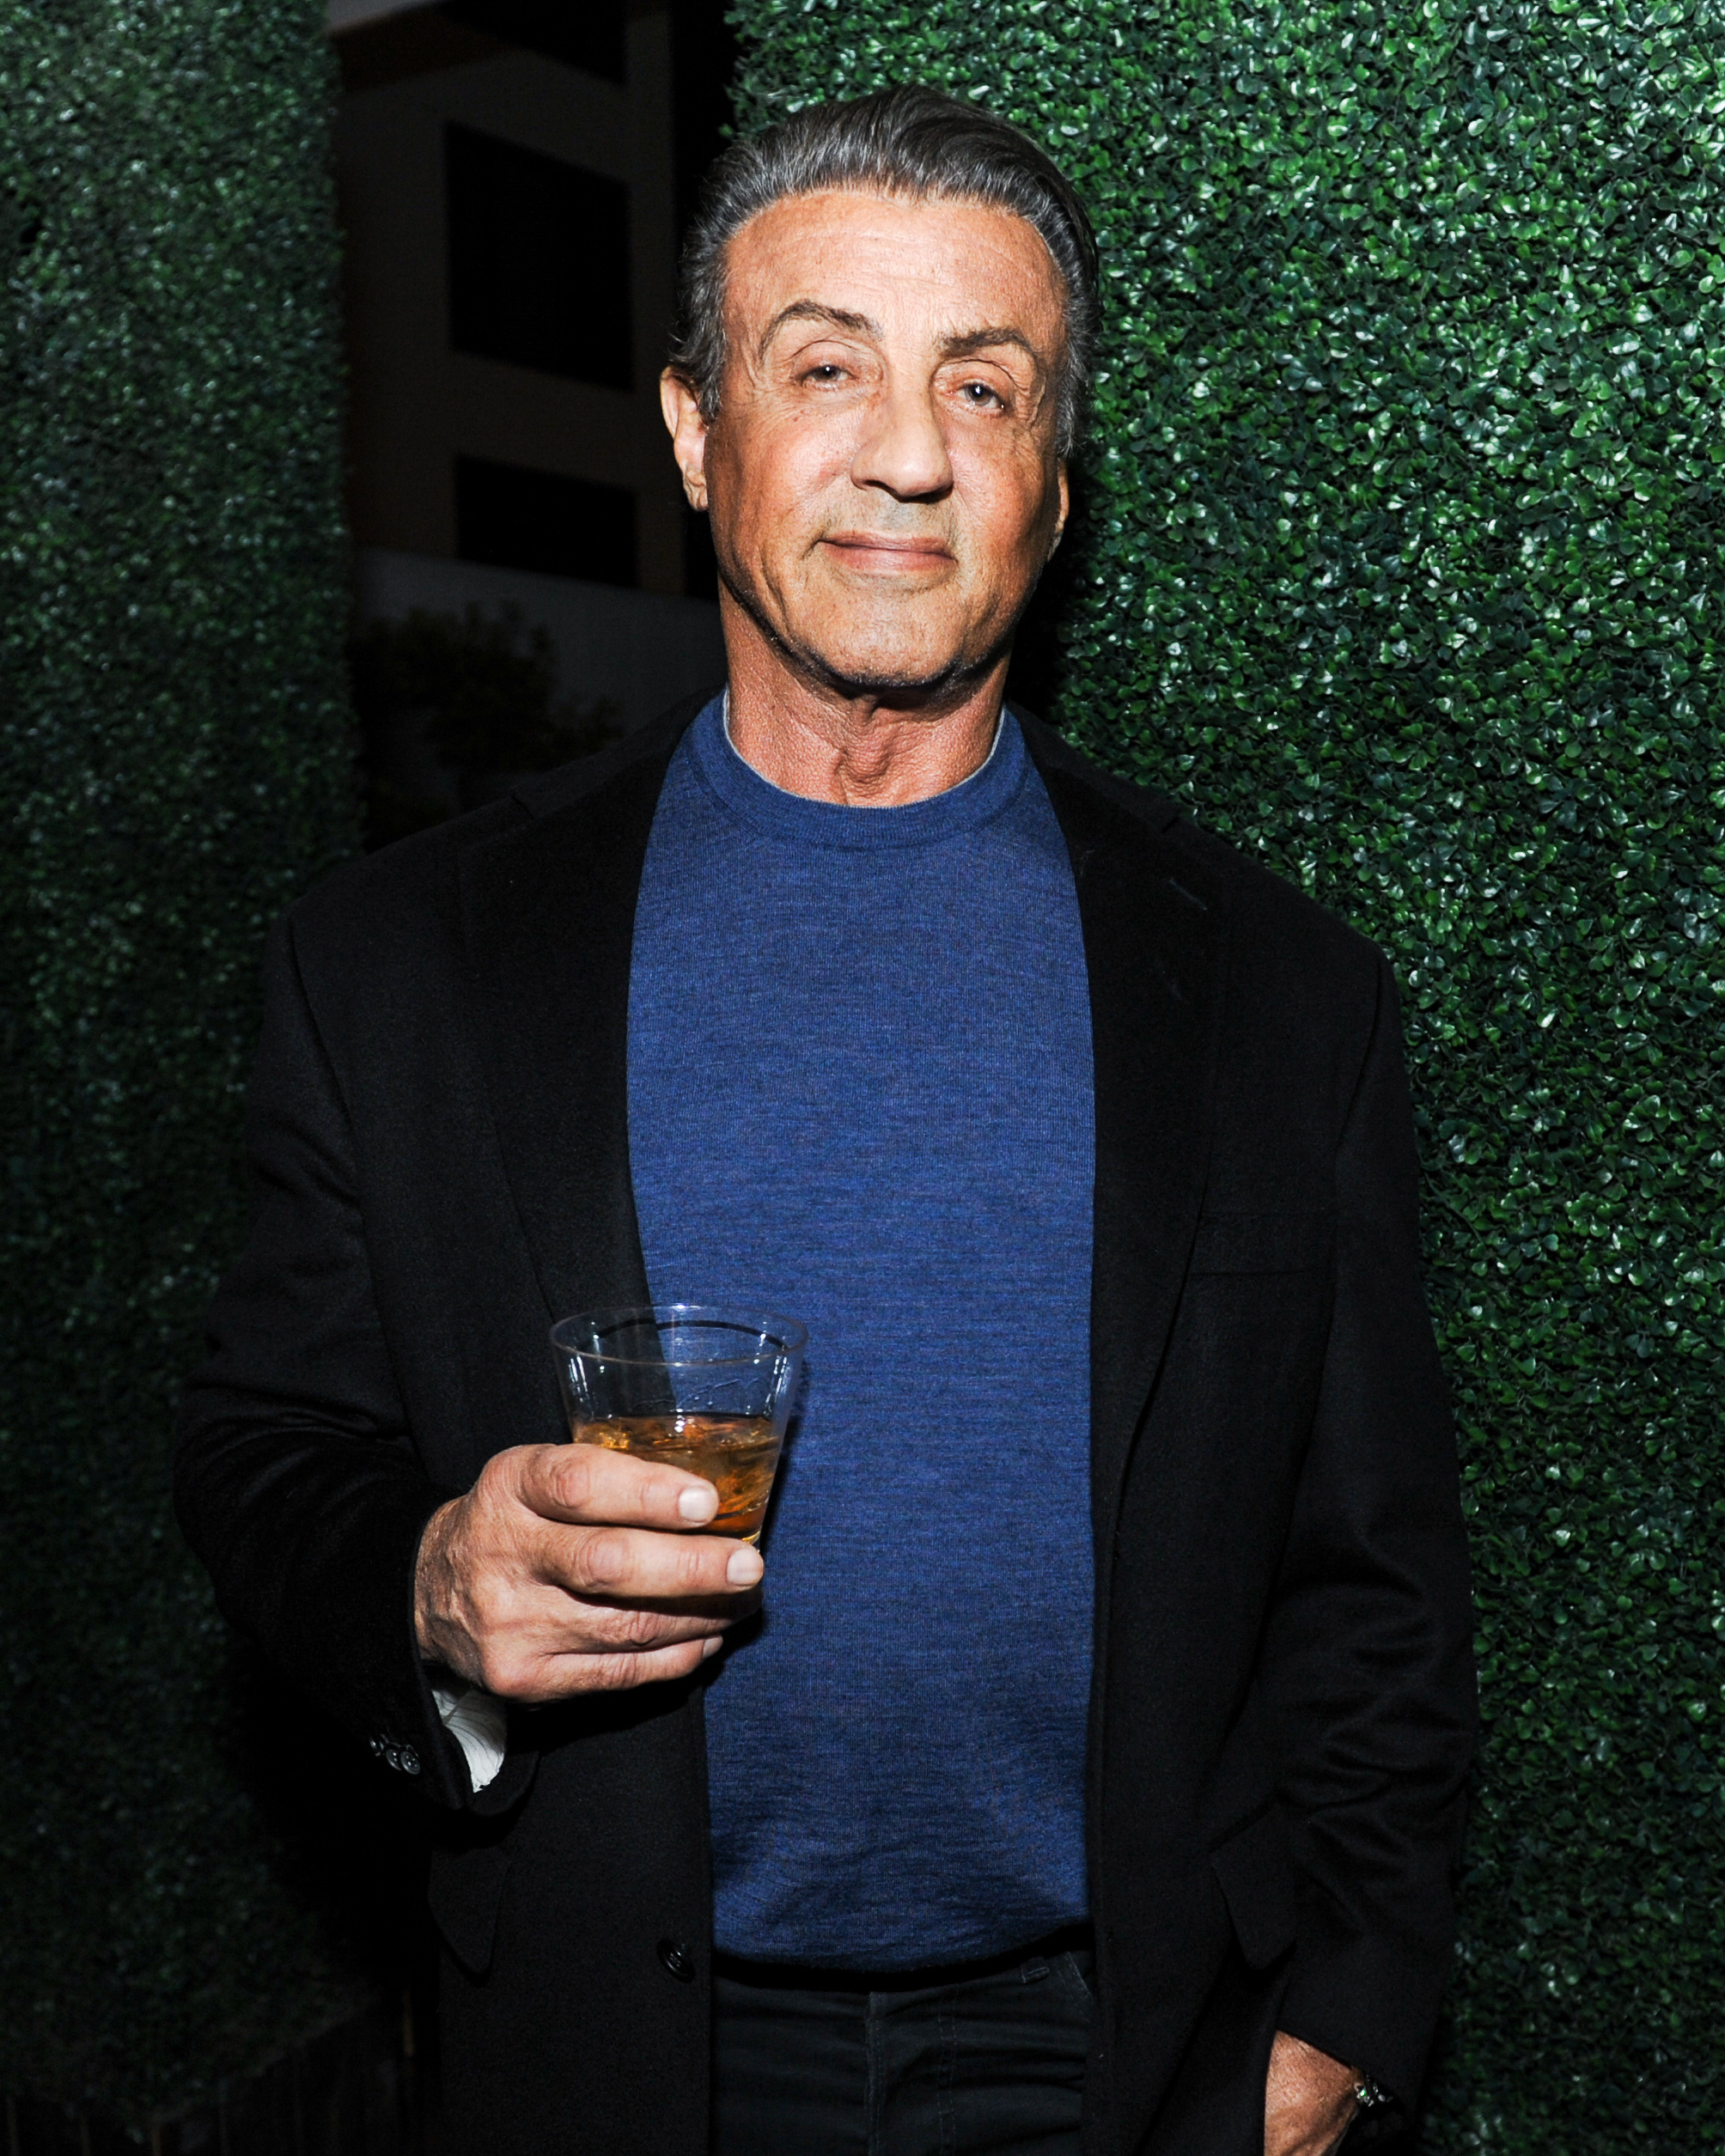 Sylvester Stallone after plastic surgery '80s stars